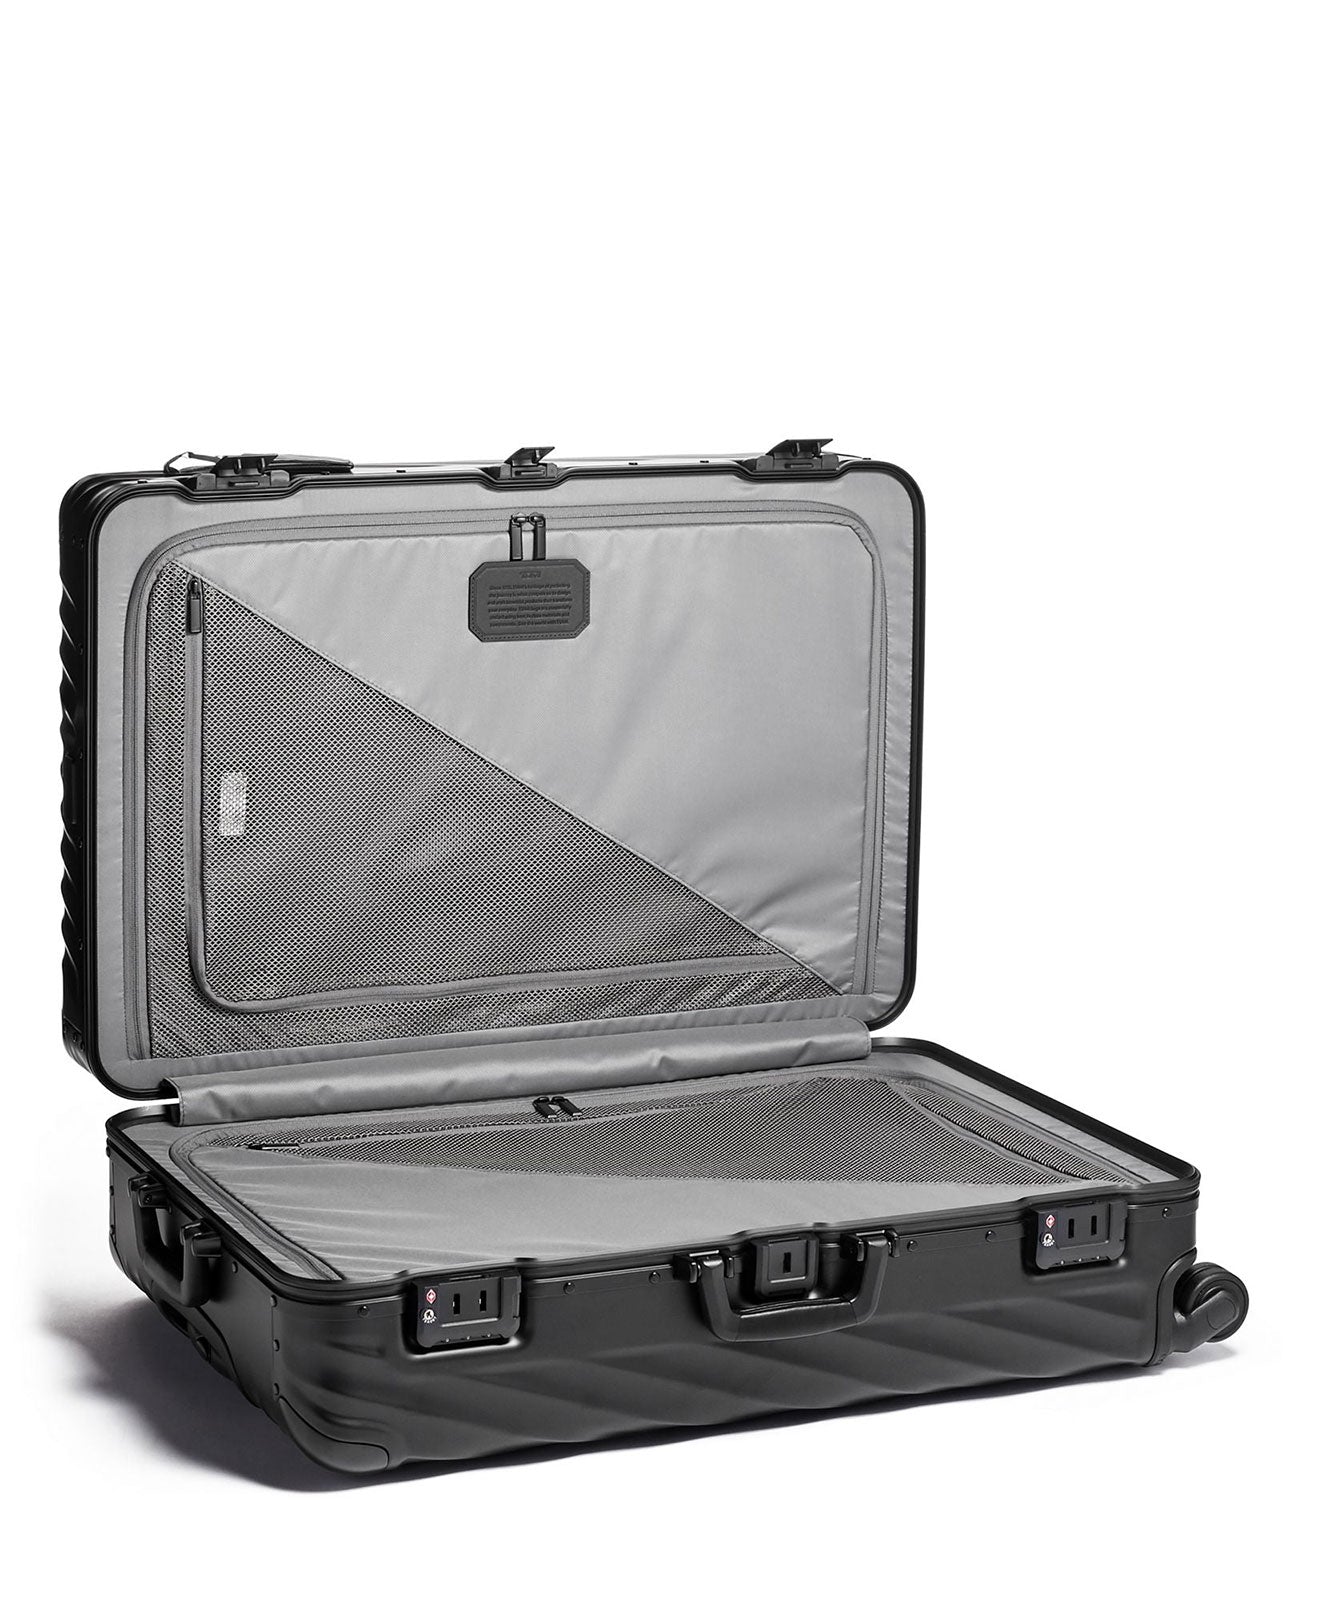 Tumi Extended Trip Packing Case, Black